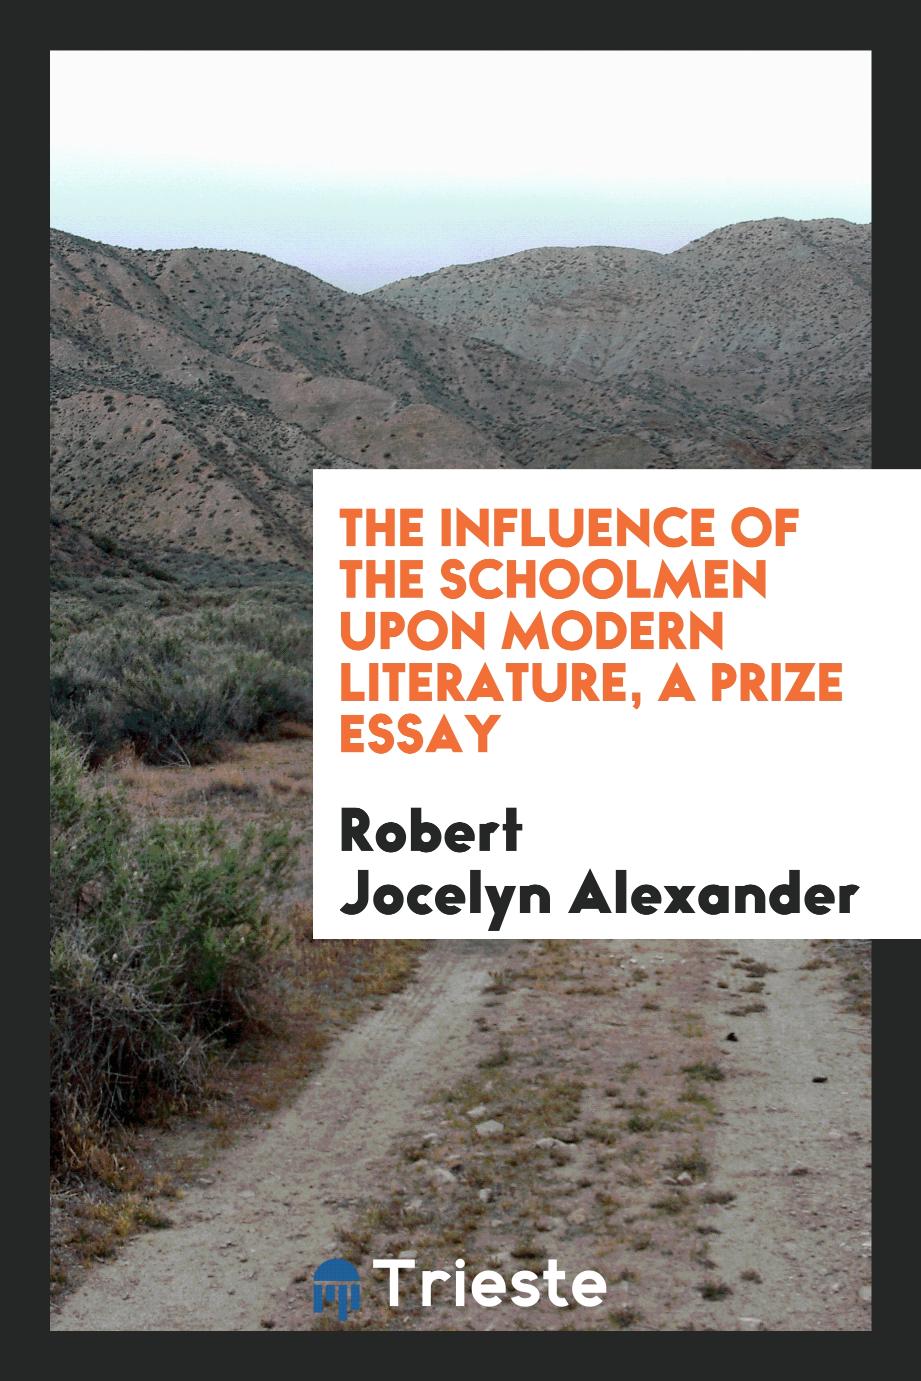 The influence of the schoolmen upon modern literature, a prize essay